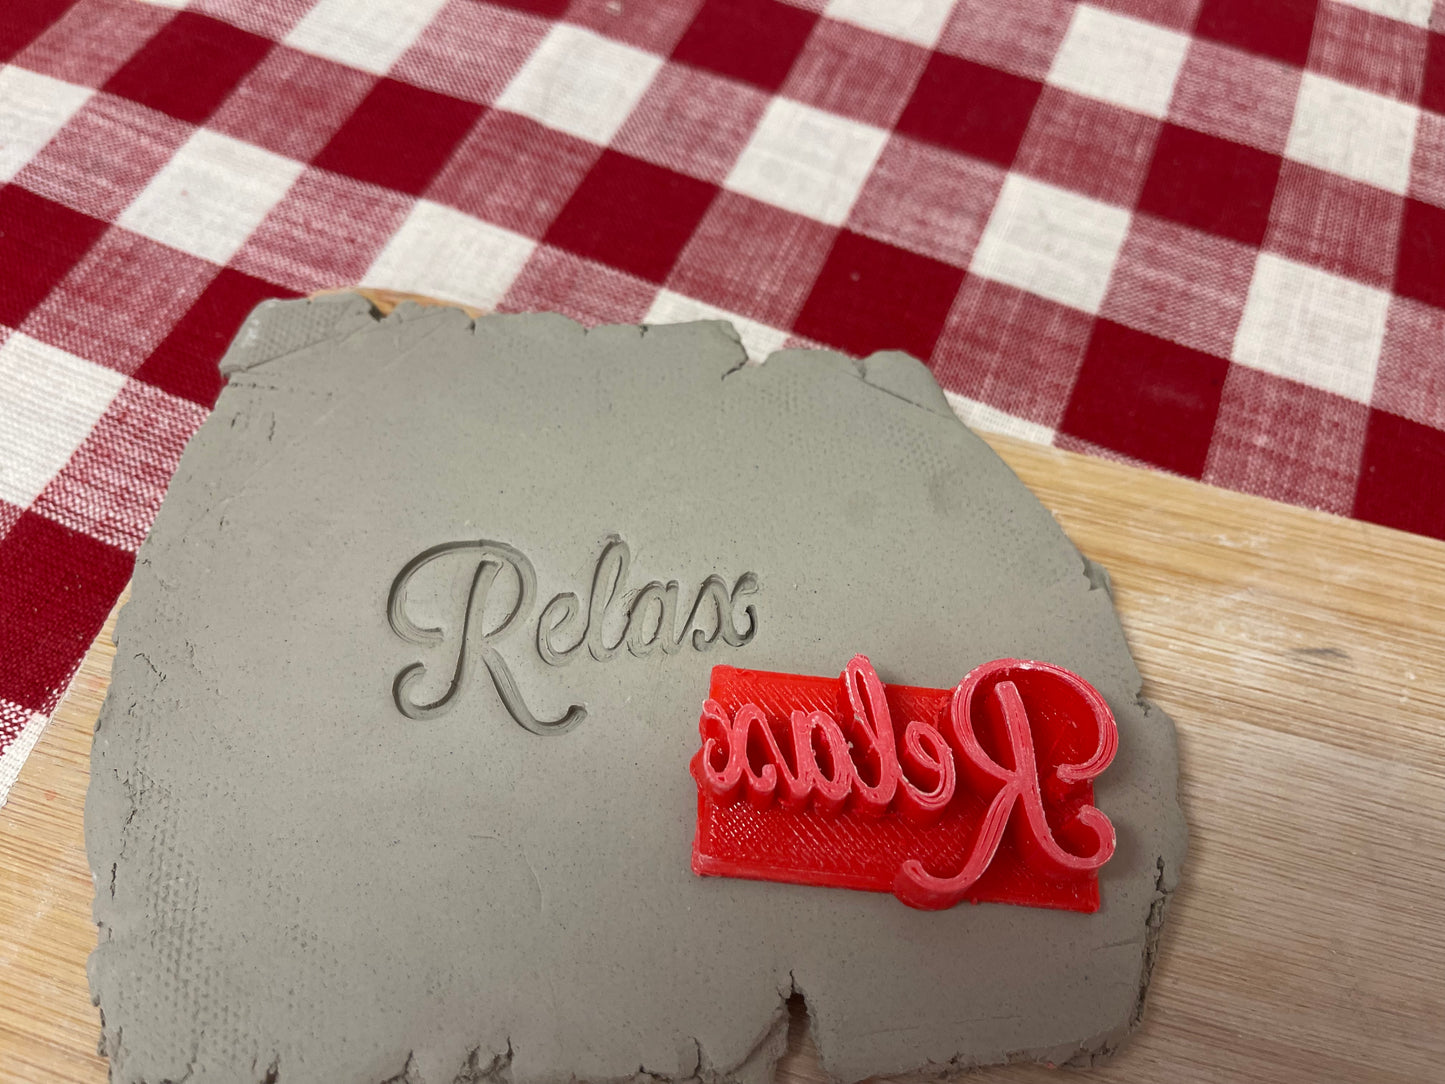 "Relax" word stamp - March 2023 mystery box, plastic 3D printed. multiple sizes available